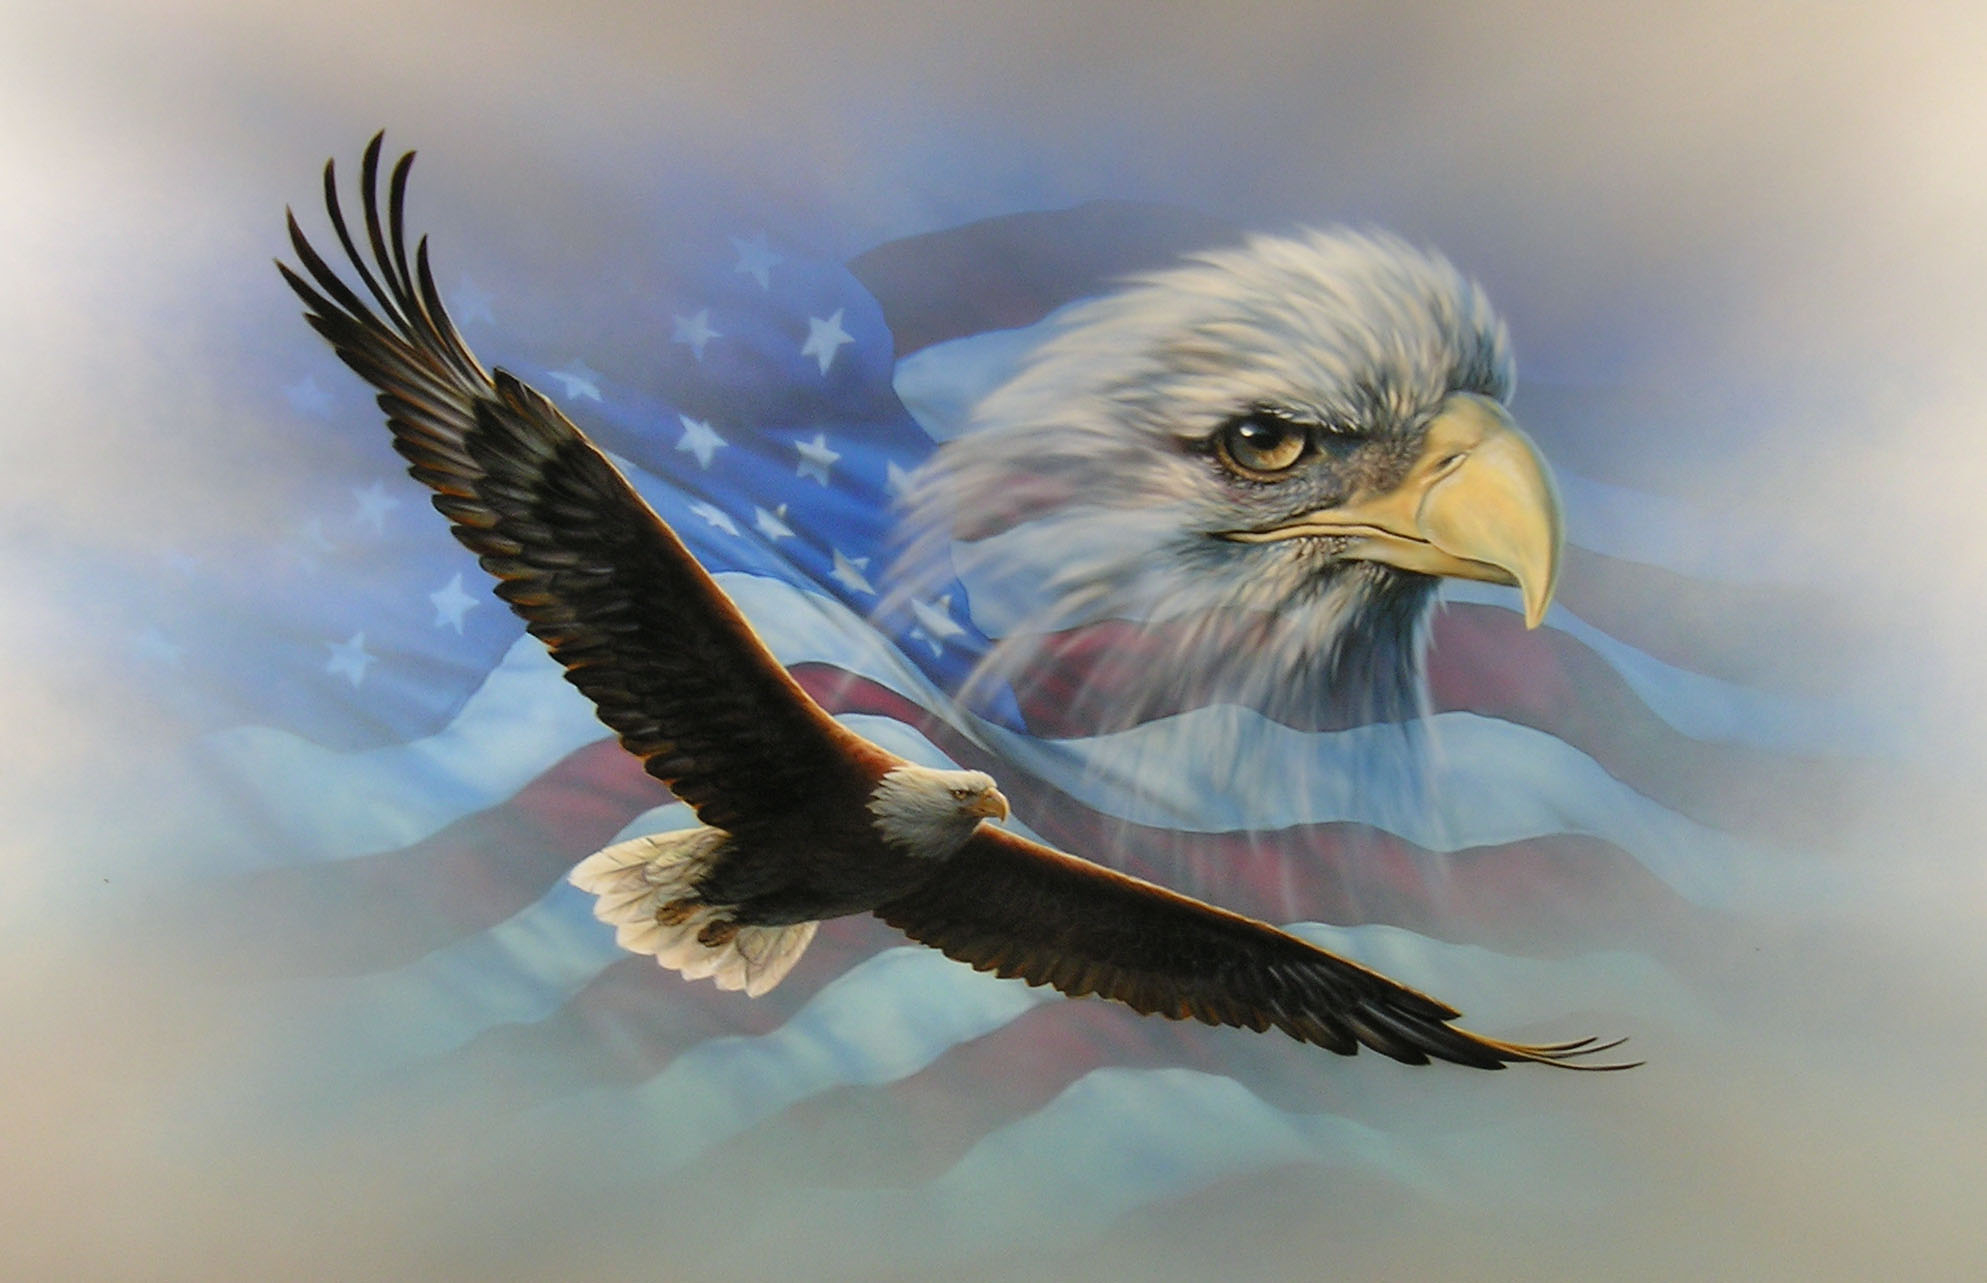 1987x1283 49+] Patriotic Eagle Wallpapers Free